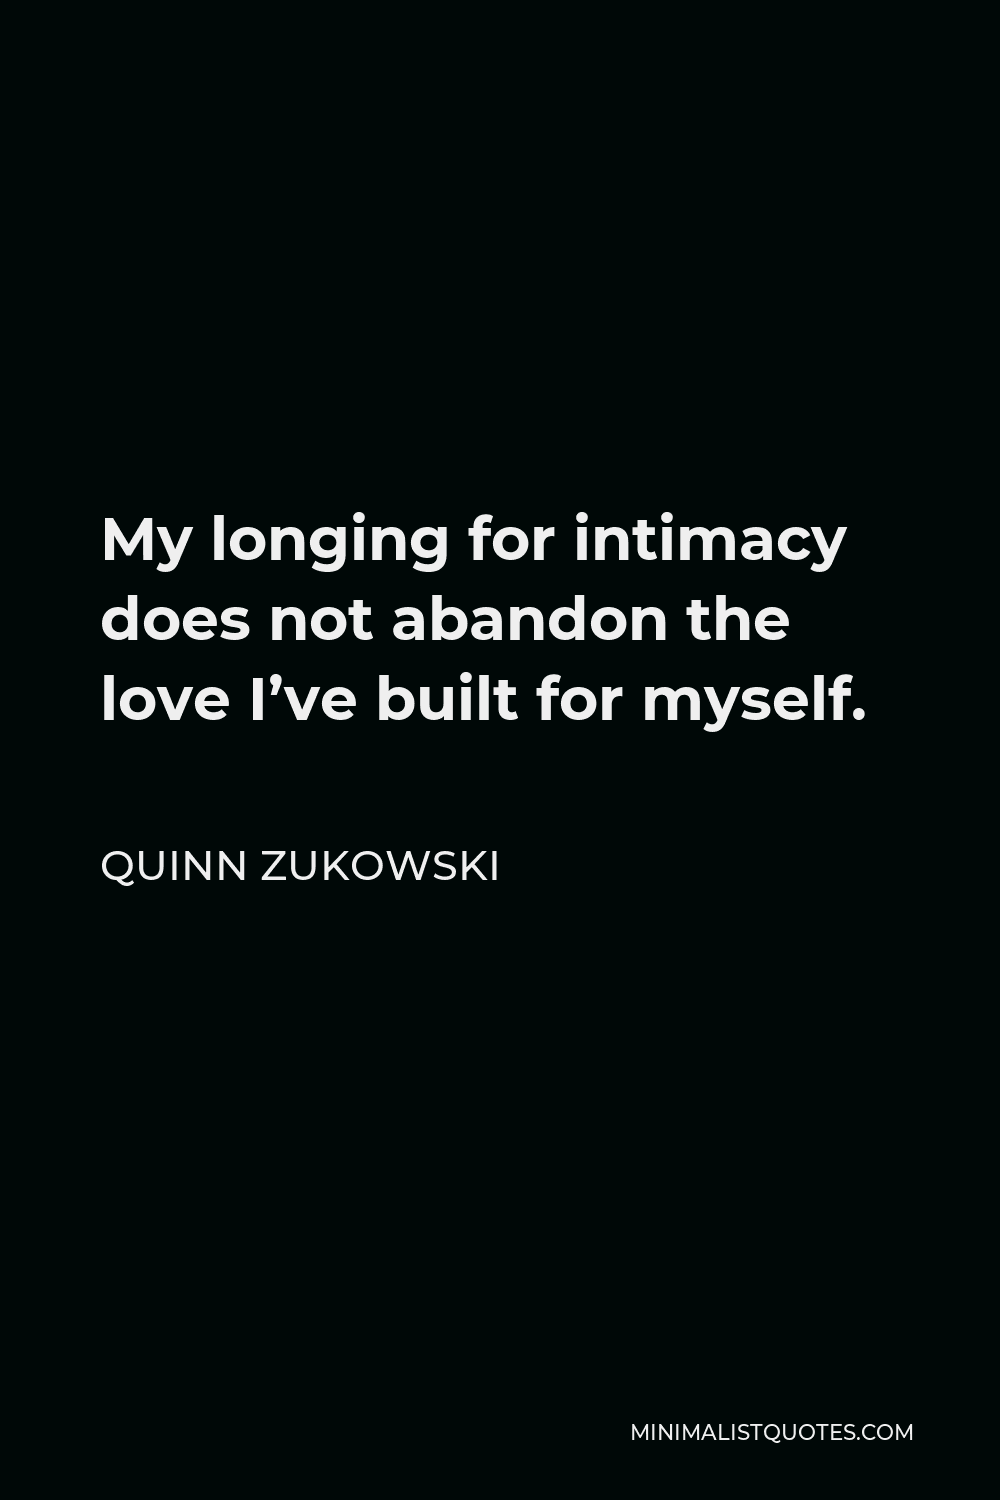 Quinn Zukowski Quote - My longing for intimacy does not abandon the love I’ve built for myself.